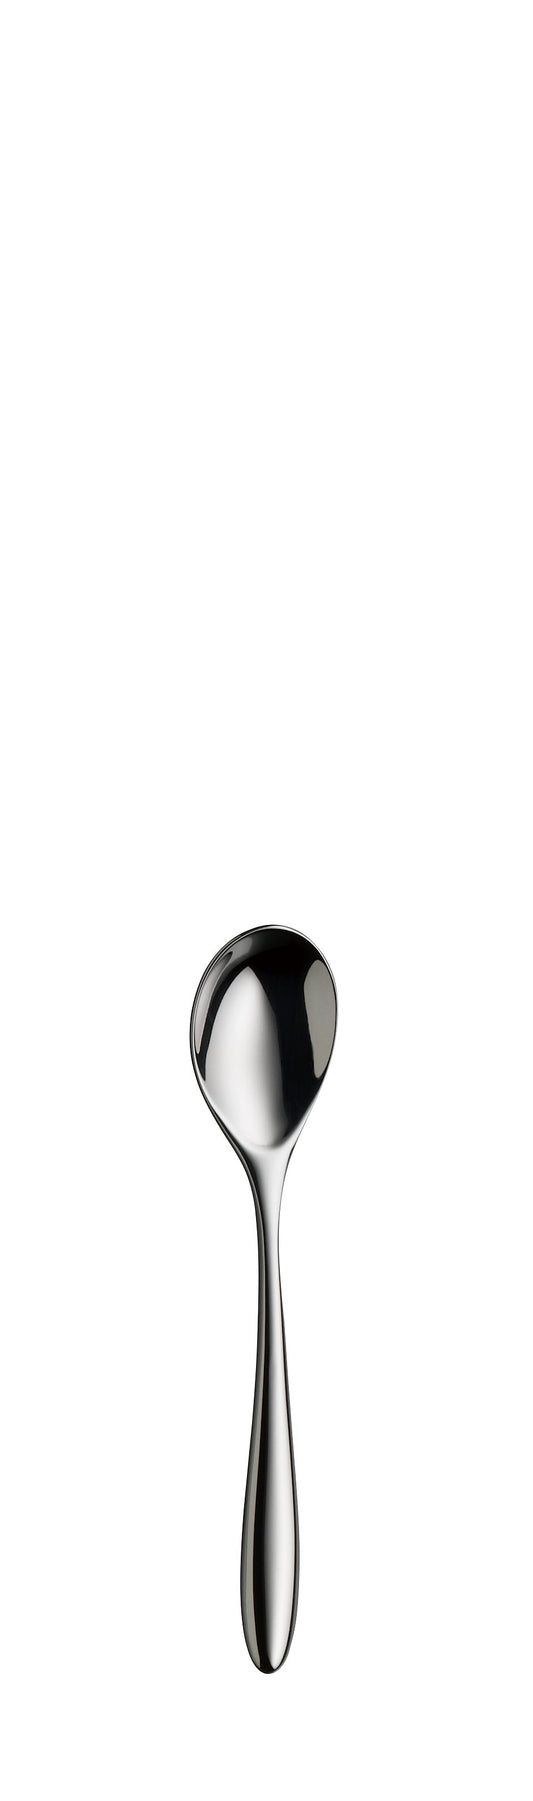 Espresso spoon AVES silver plated 109mm